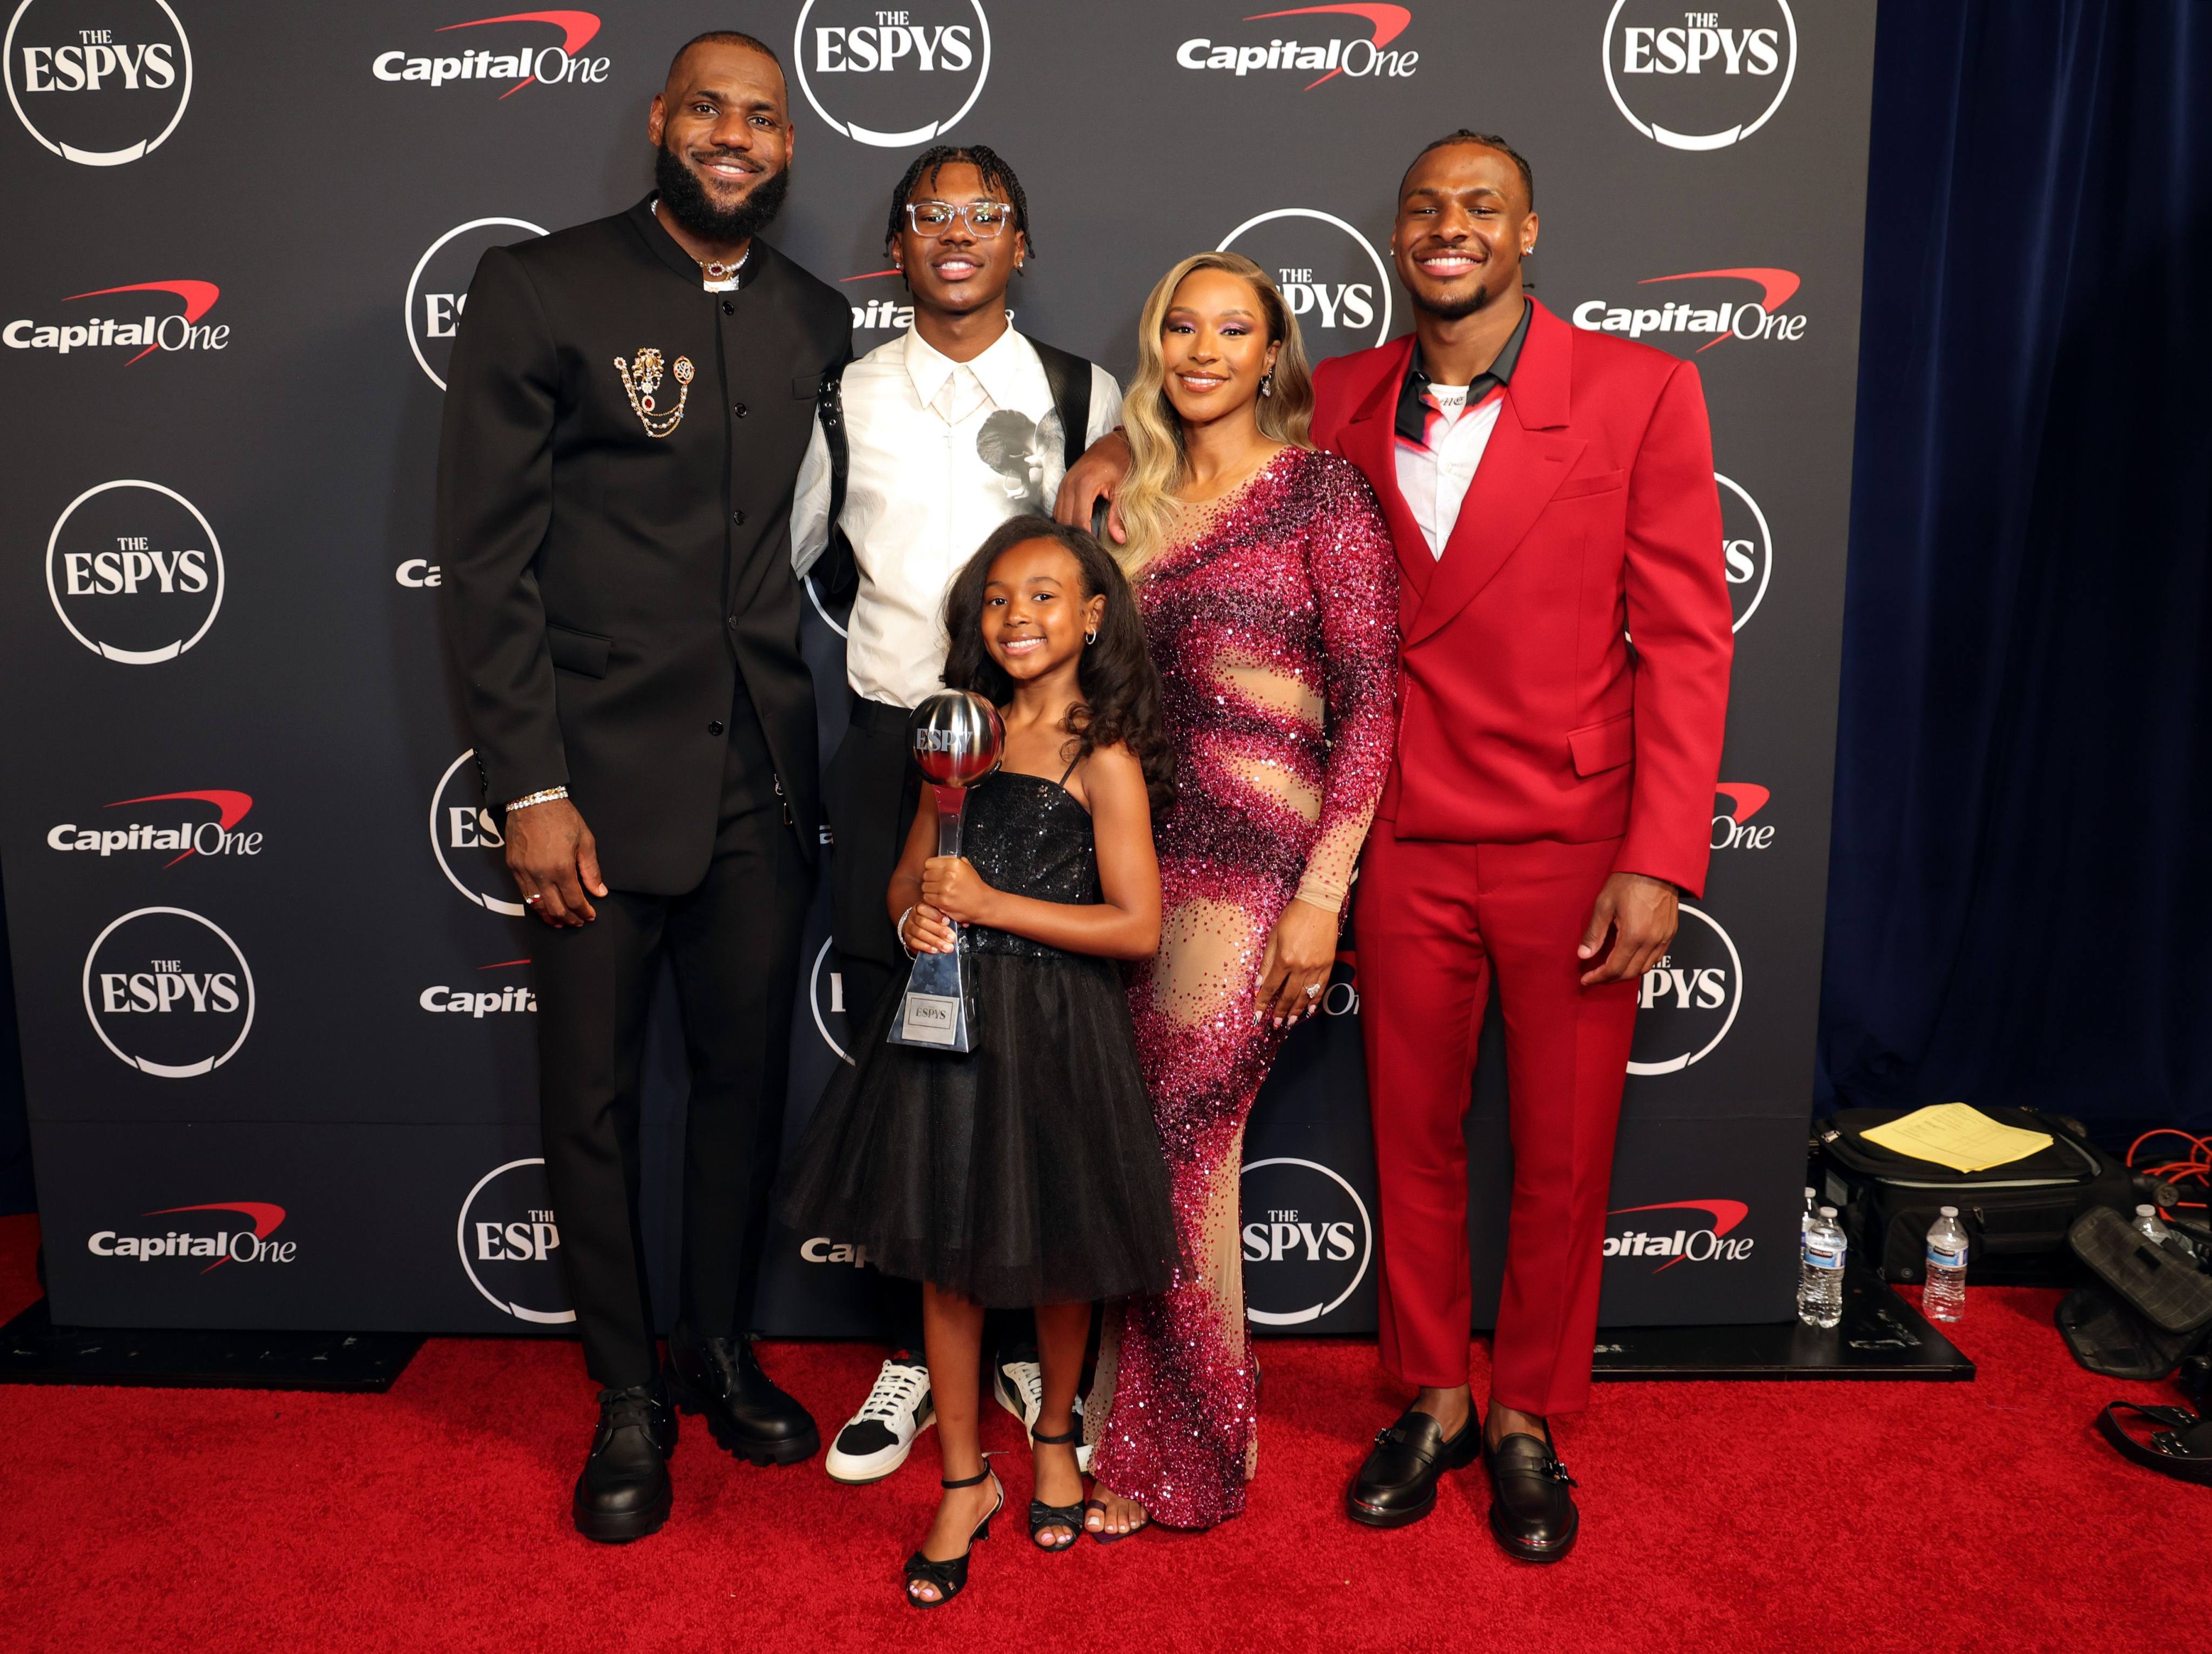 Meet LeBron James' 3 kids with wife Savannah: the NBA basketball  billionaire's sons Bronny and Bryce Maximus are following in their dad's  footsteps, while 8-year-old Zhuri Nova is a  star